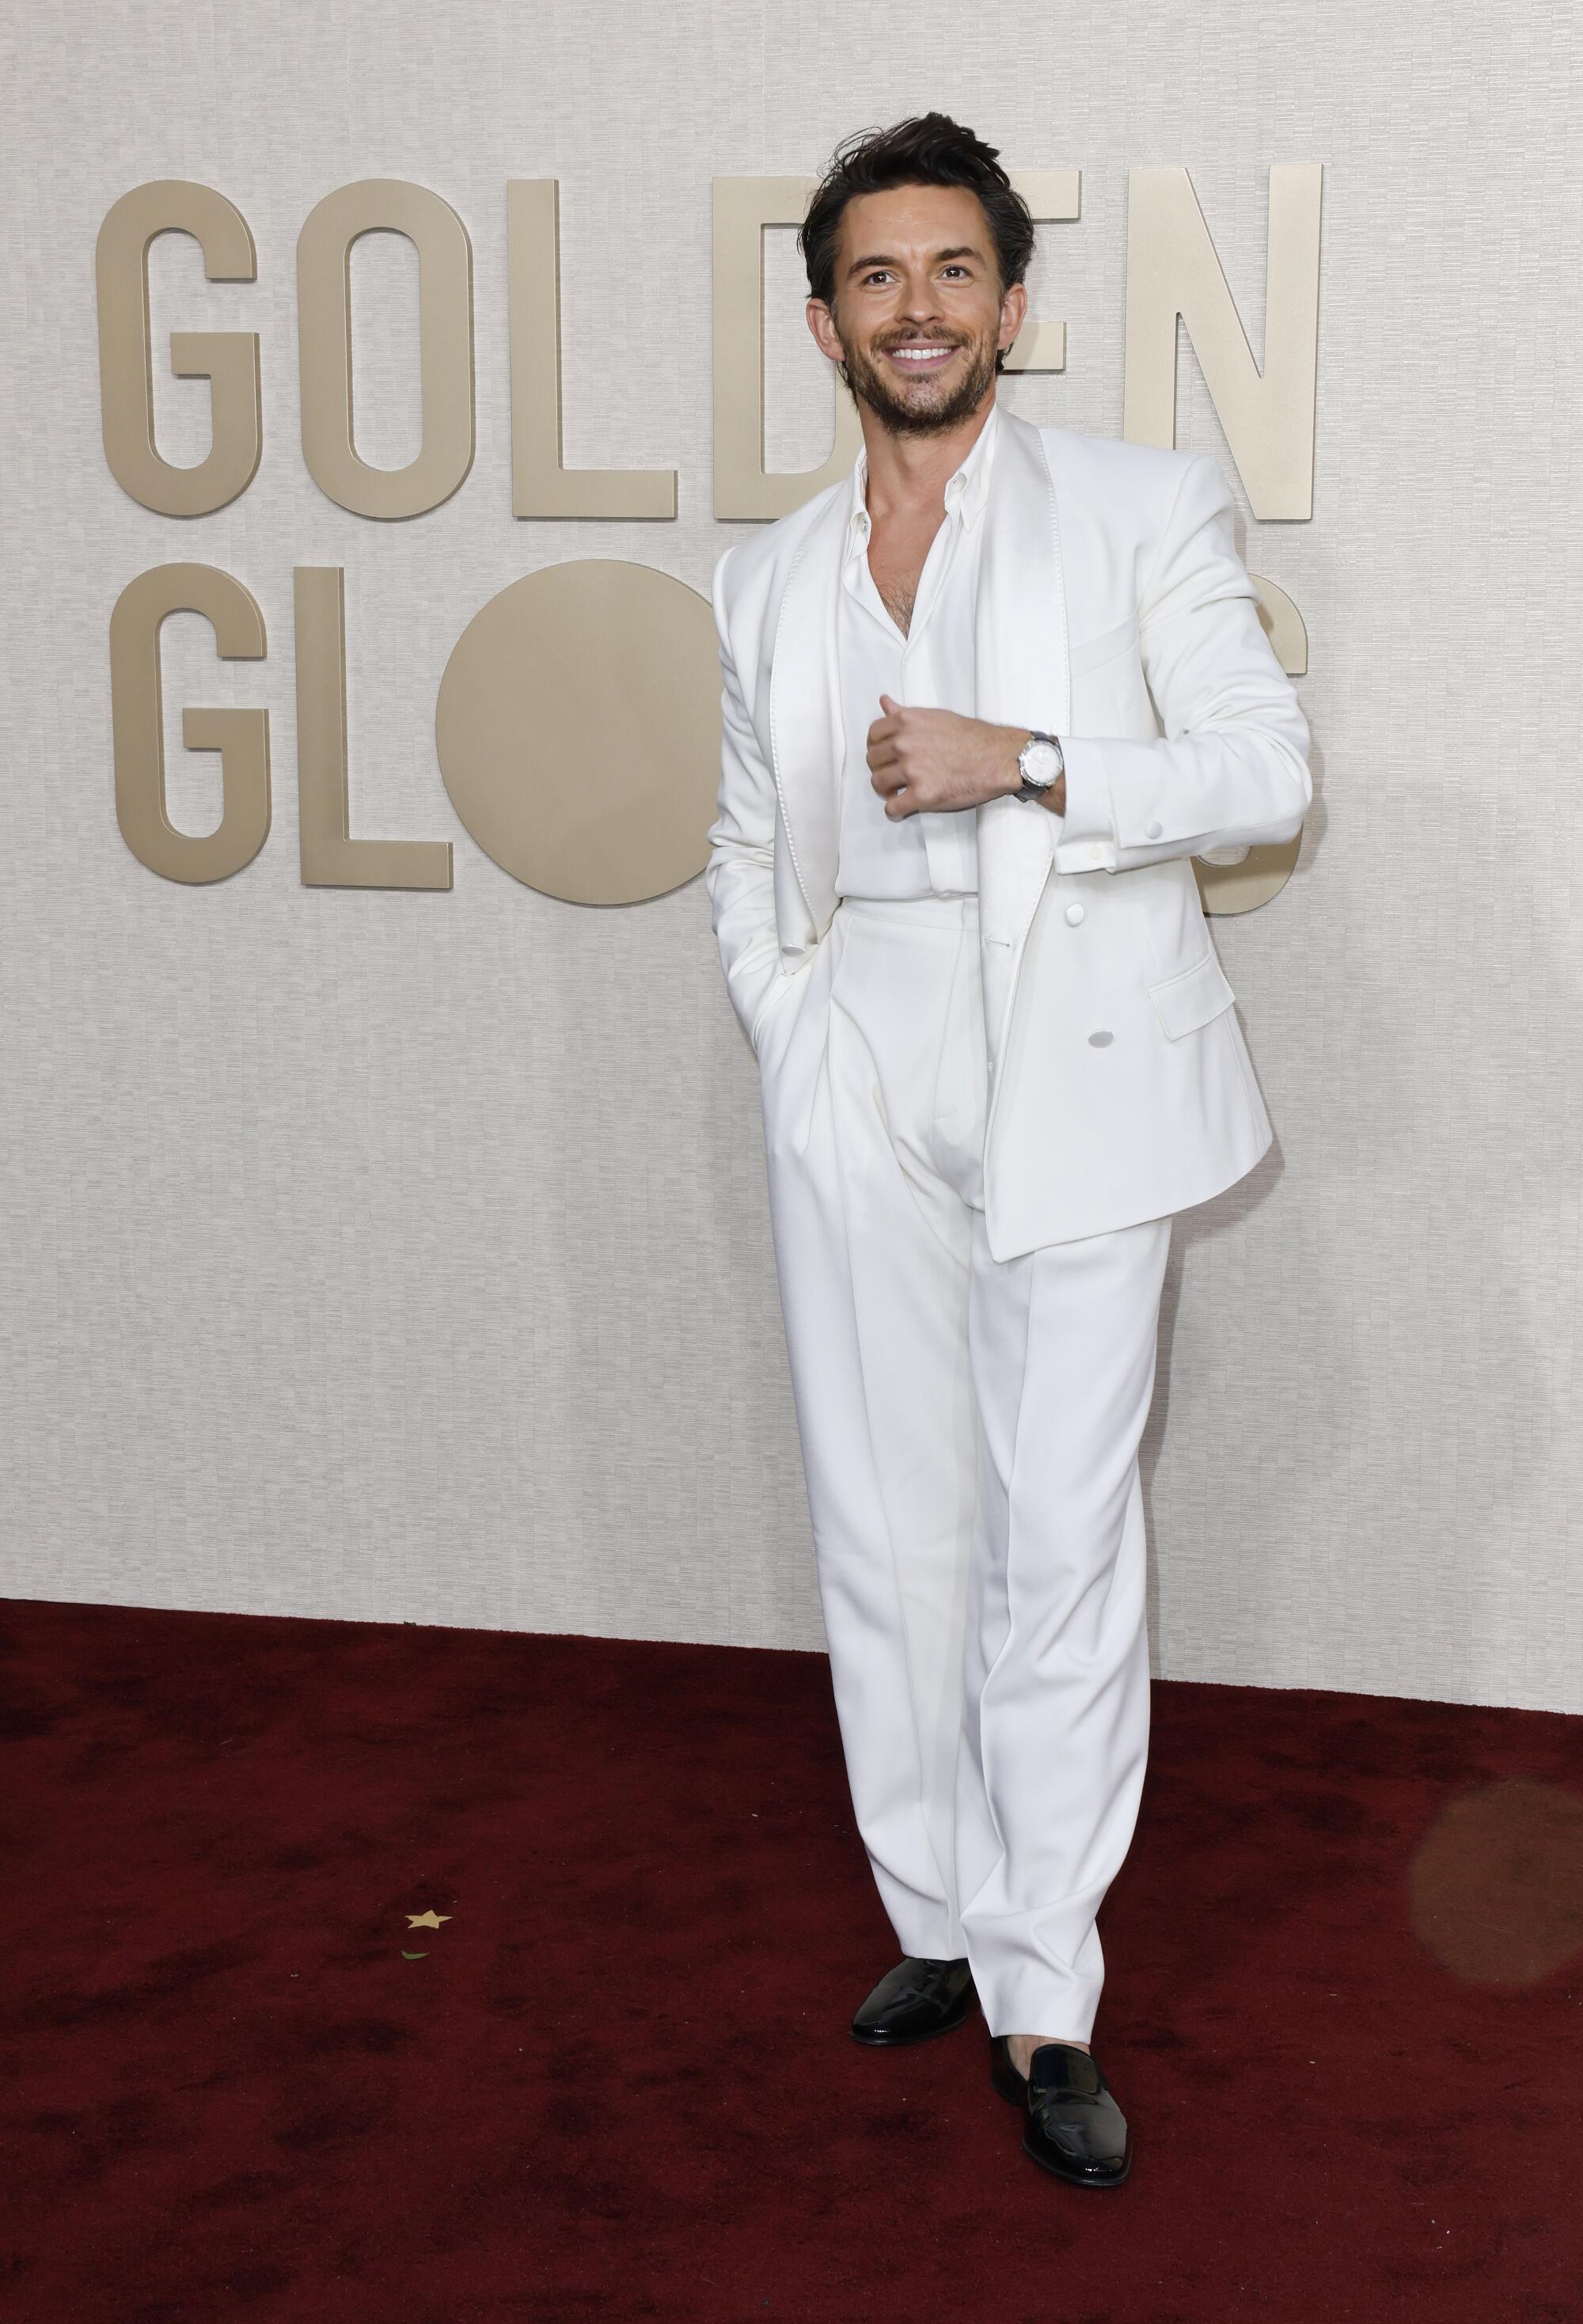 Jonathan Bailey on the red carpet of the 81st Golden Globe Awards at the Beverly Hilton on Jan. 7.